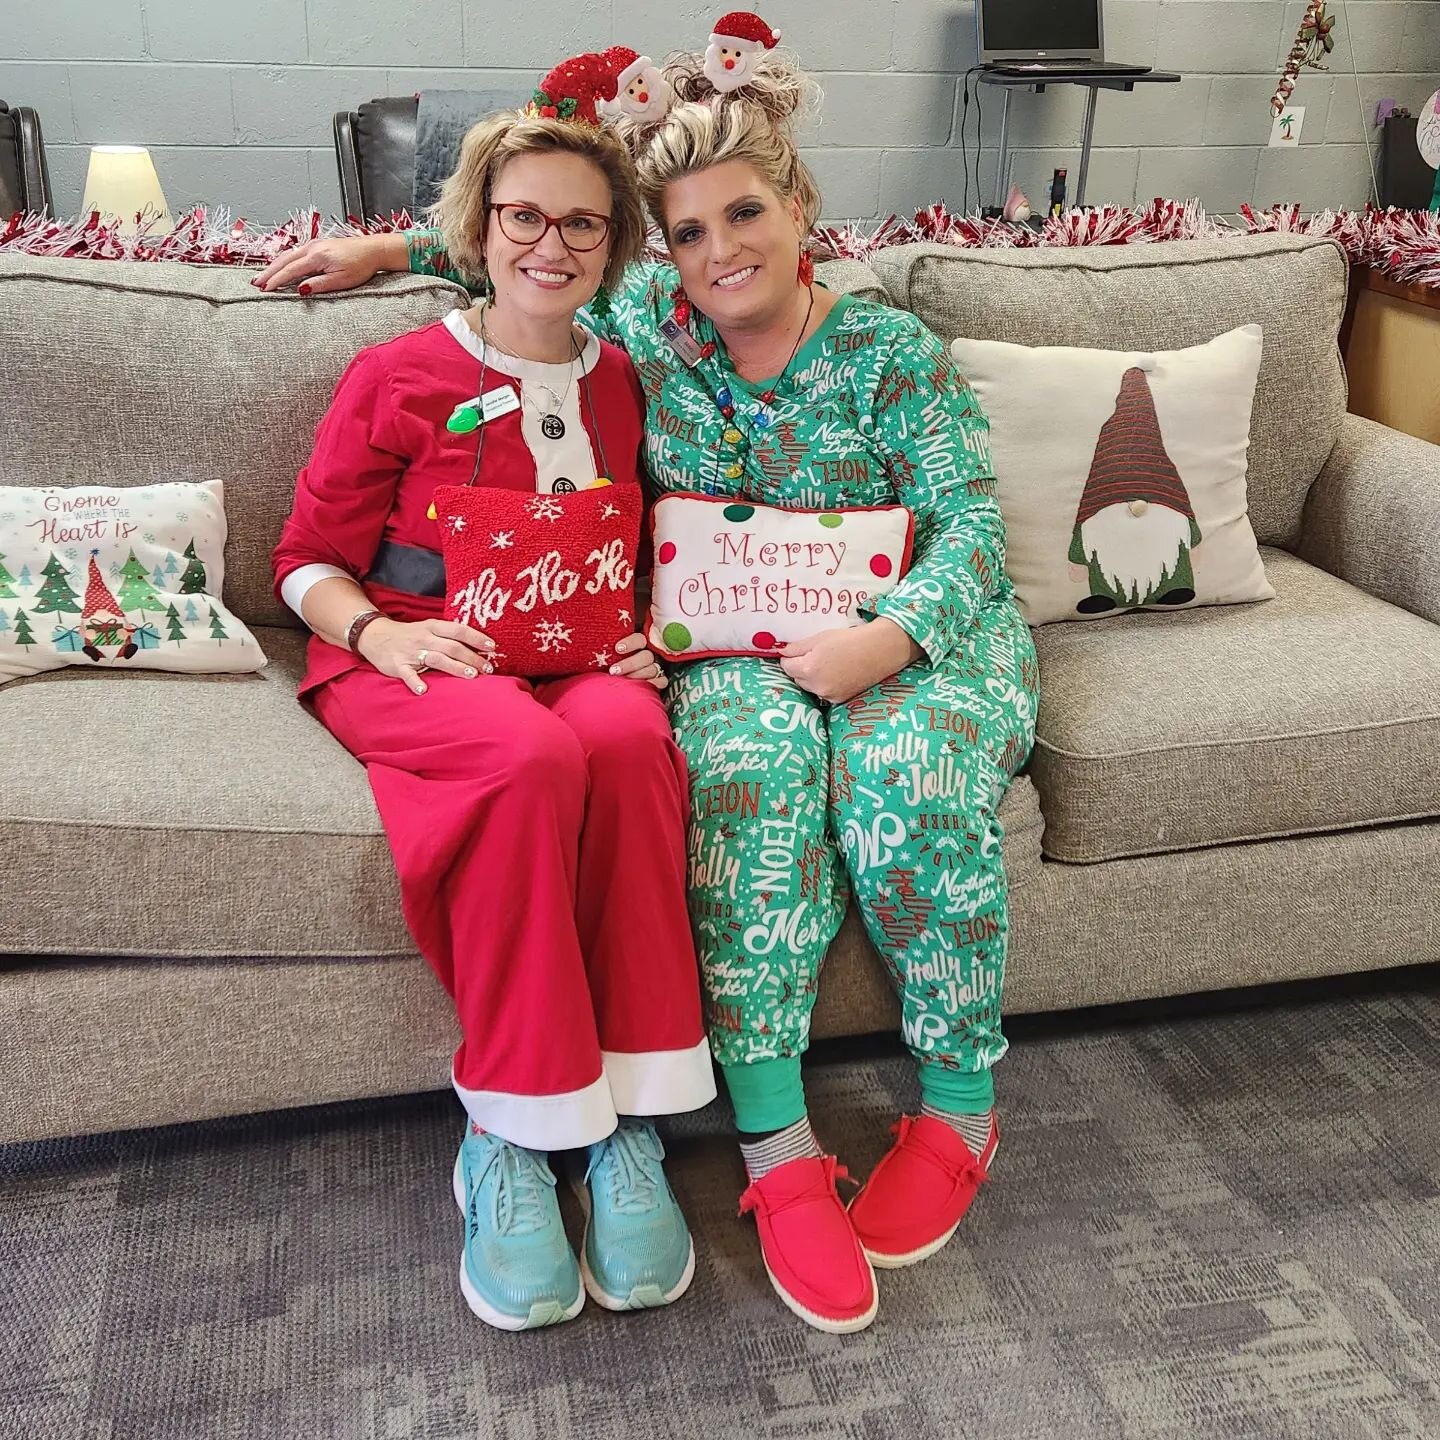 In celebration of Christmas week, we wore Christmas pajamas yesterday.

#merrychristmas
#occupationaltherapy